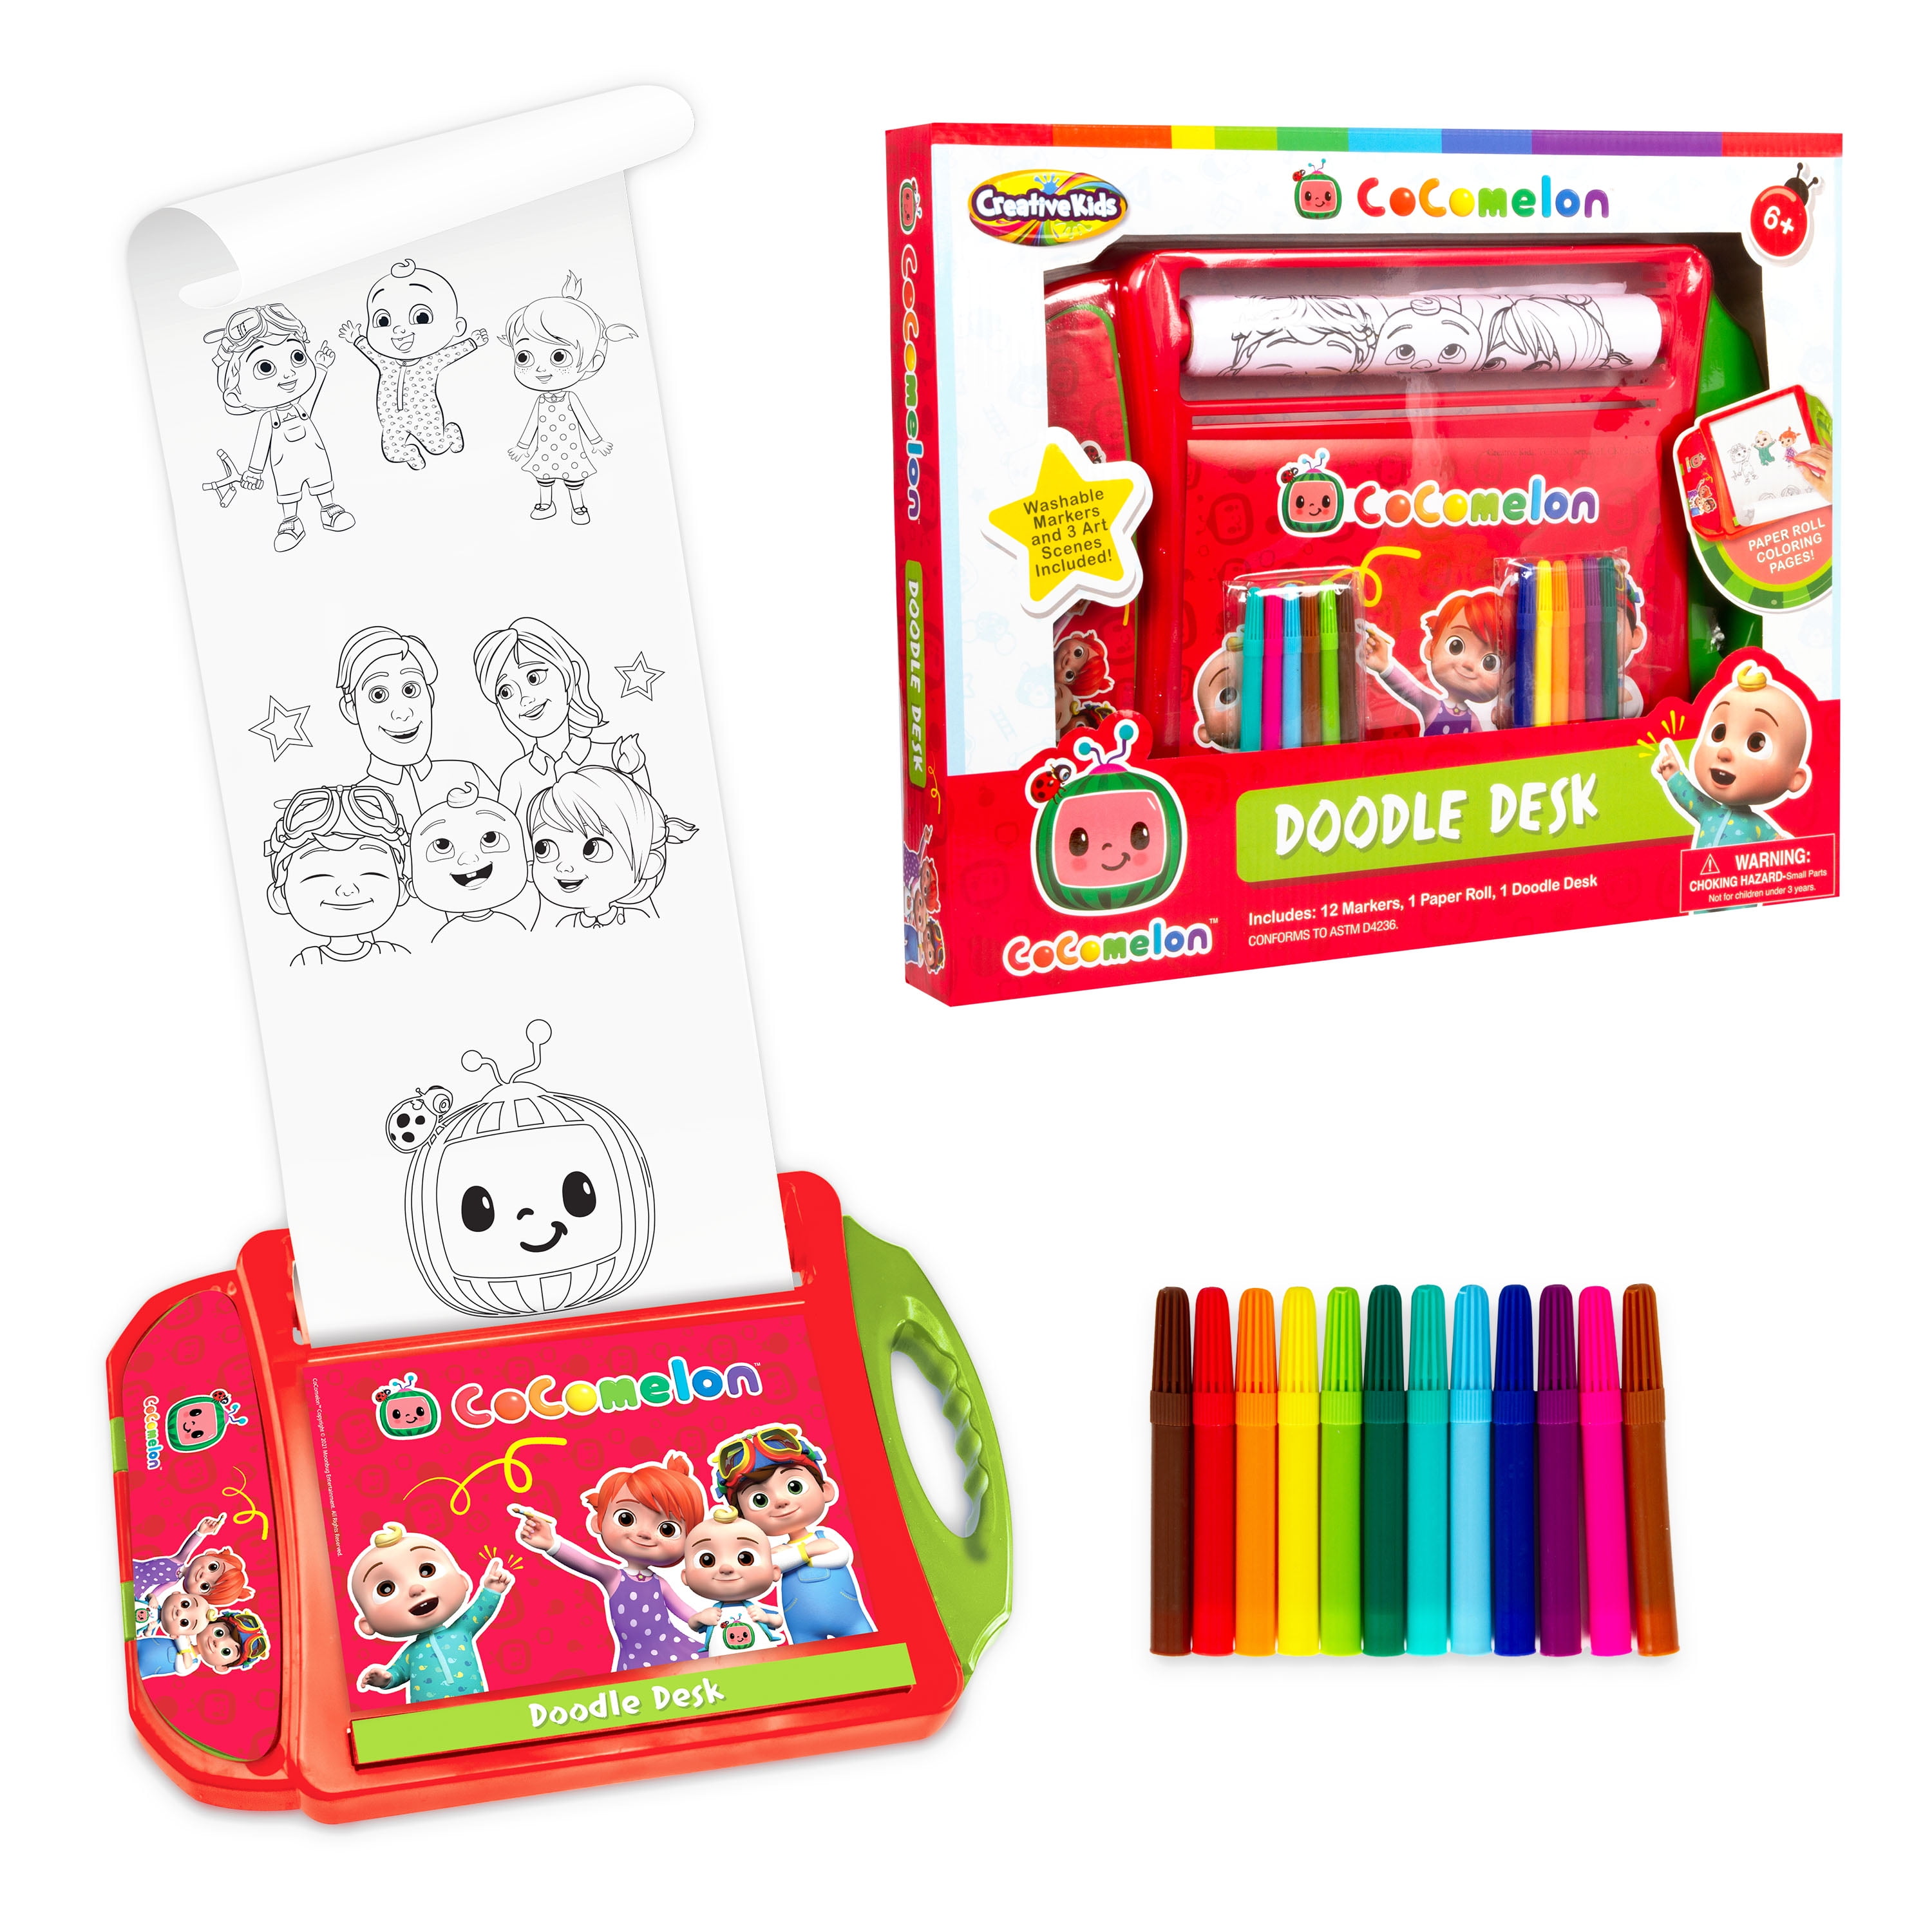 Cocomelon Coloring Book Super Set for Kids - 2 Cocomelon Activity Books and  Cocomelon Arts and Crafts Set with Stickers, Games, Puzzles, and More 